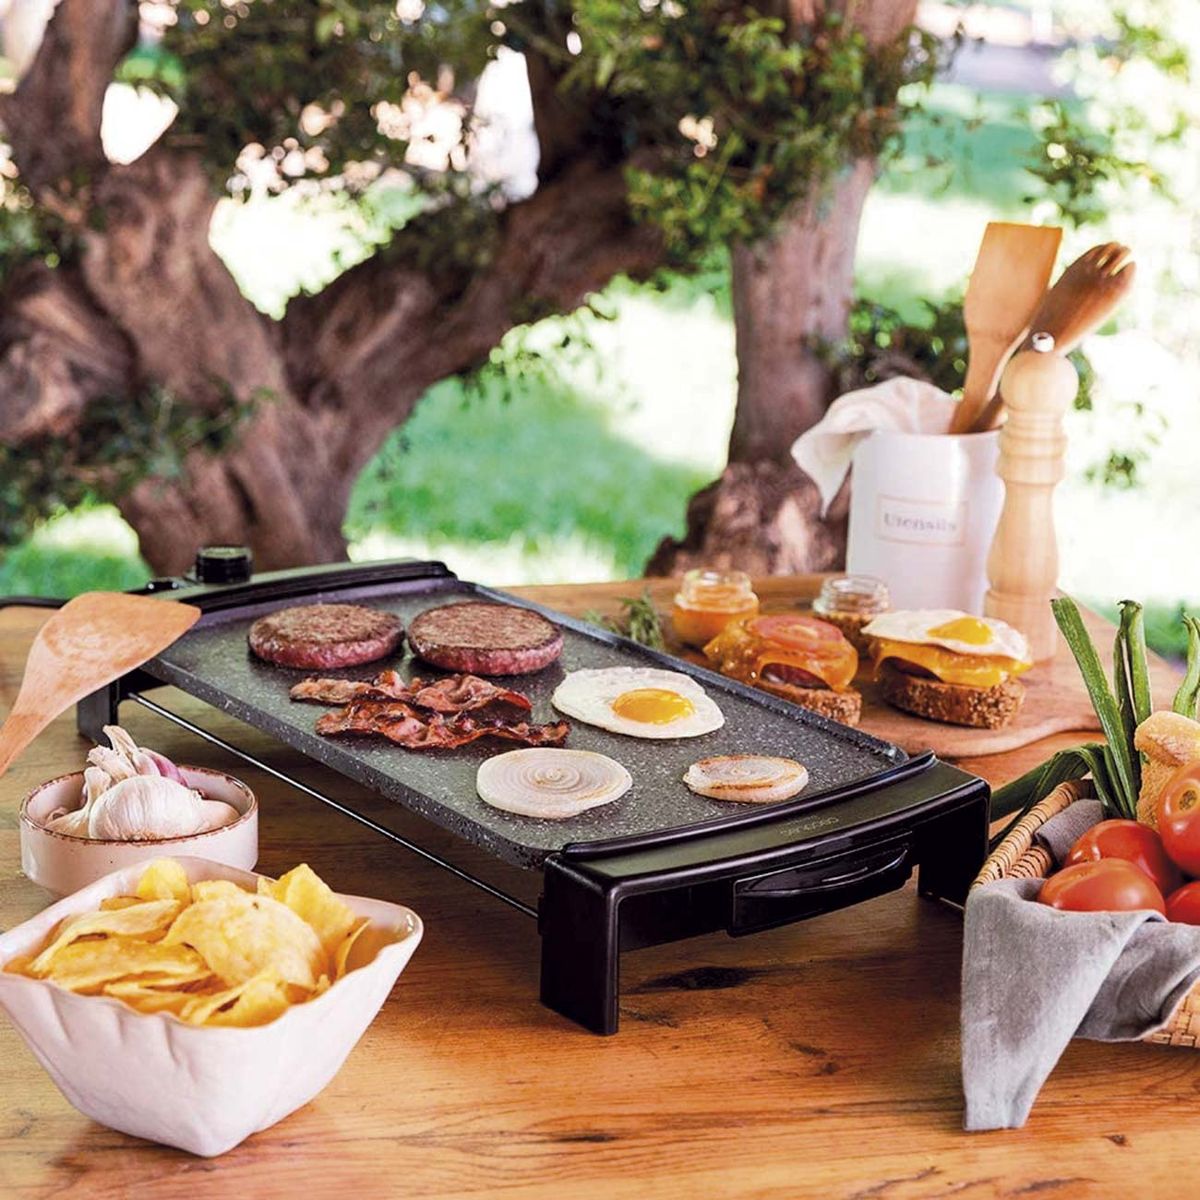 Bestron Raclette Para 1 A 2 Personas